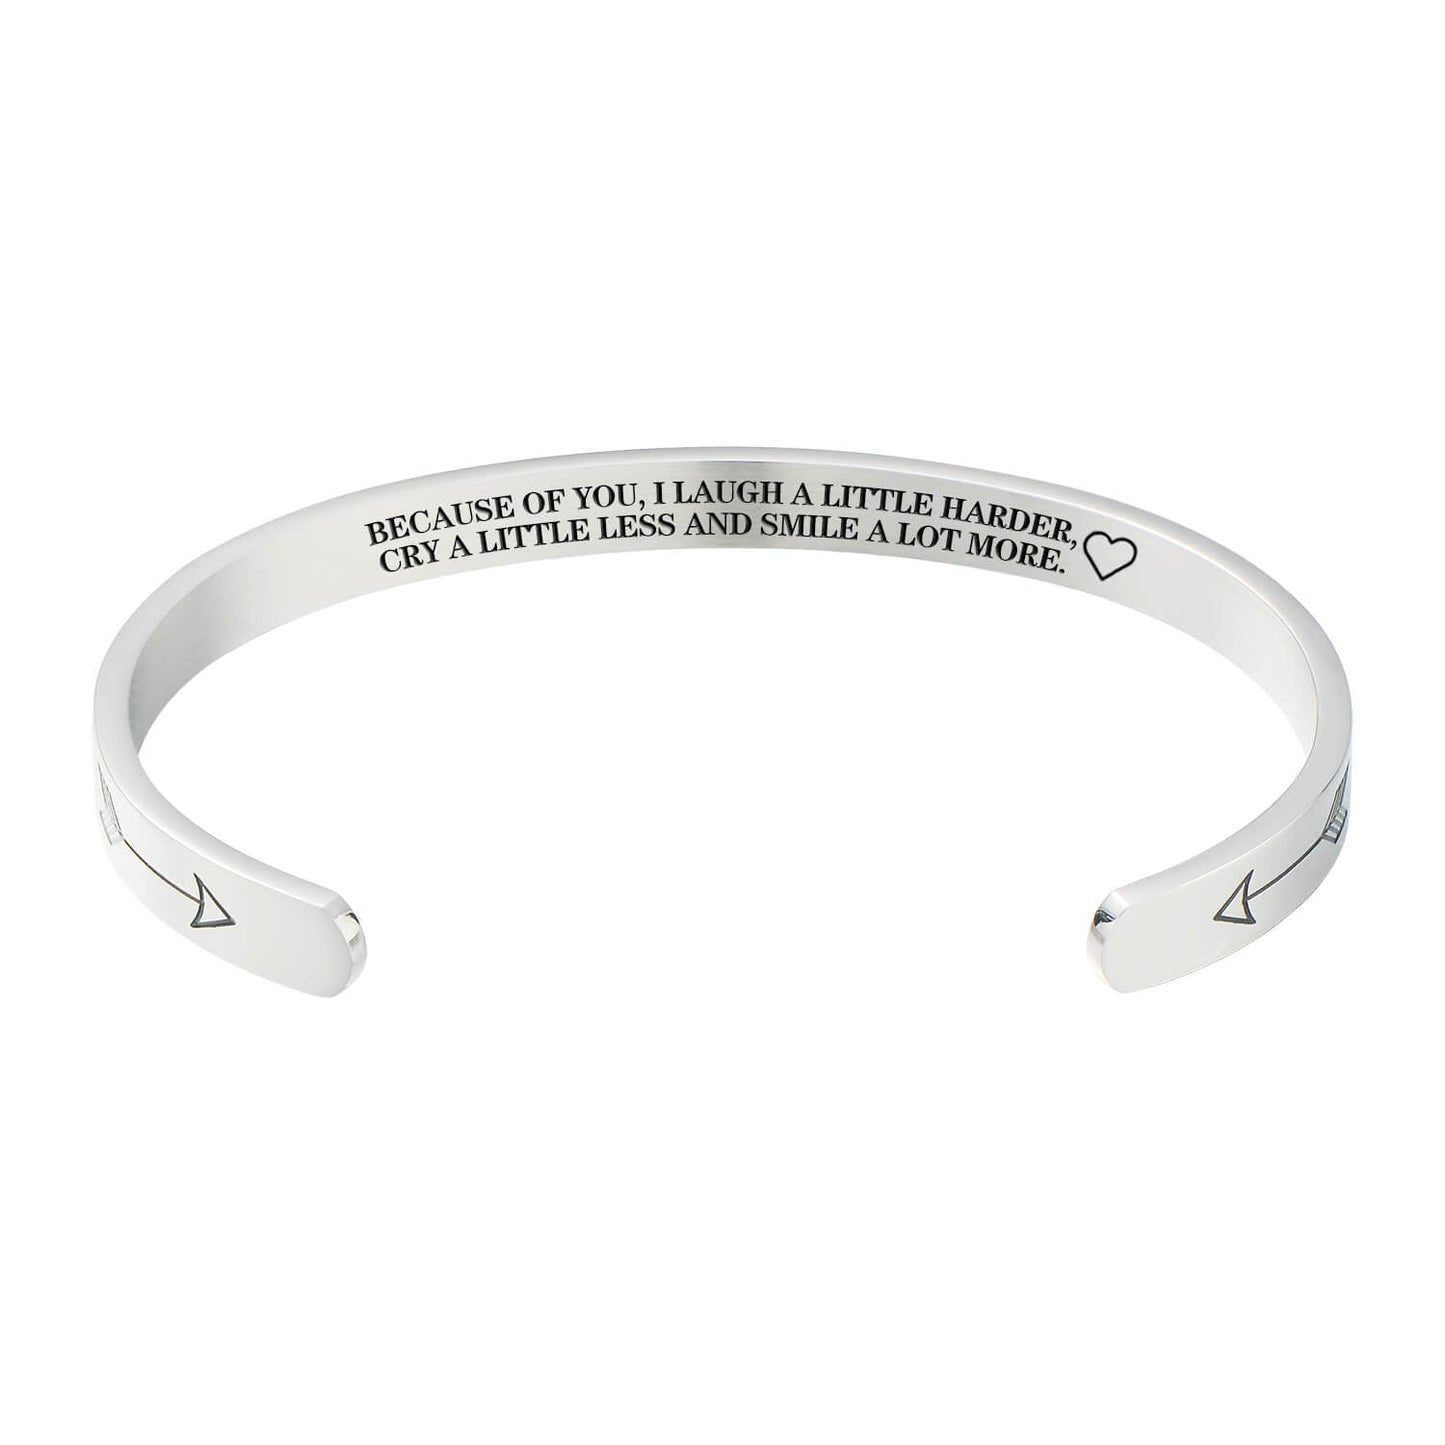 "Because of you, I laugh a little harder, cry a little less and smile a lot more." Bracelet